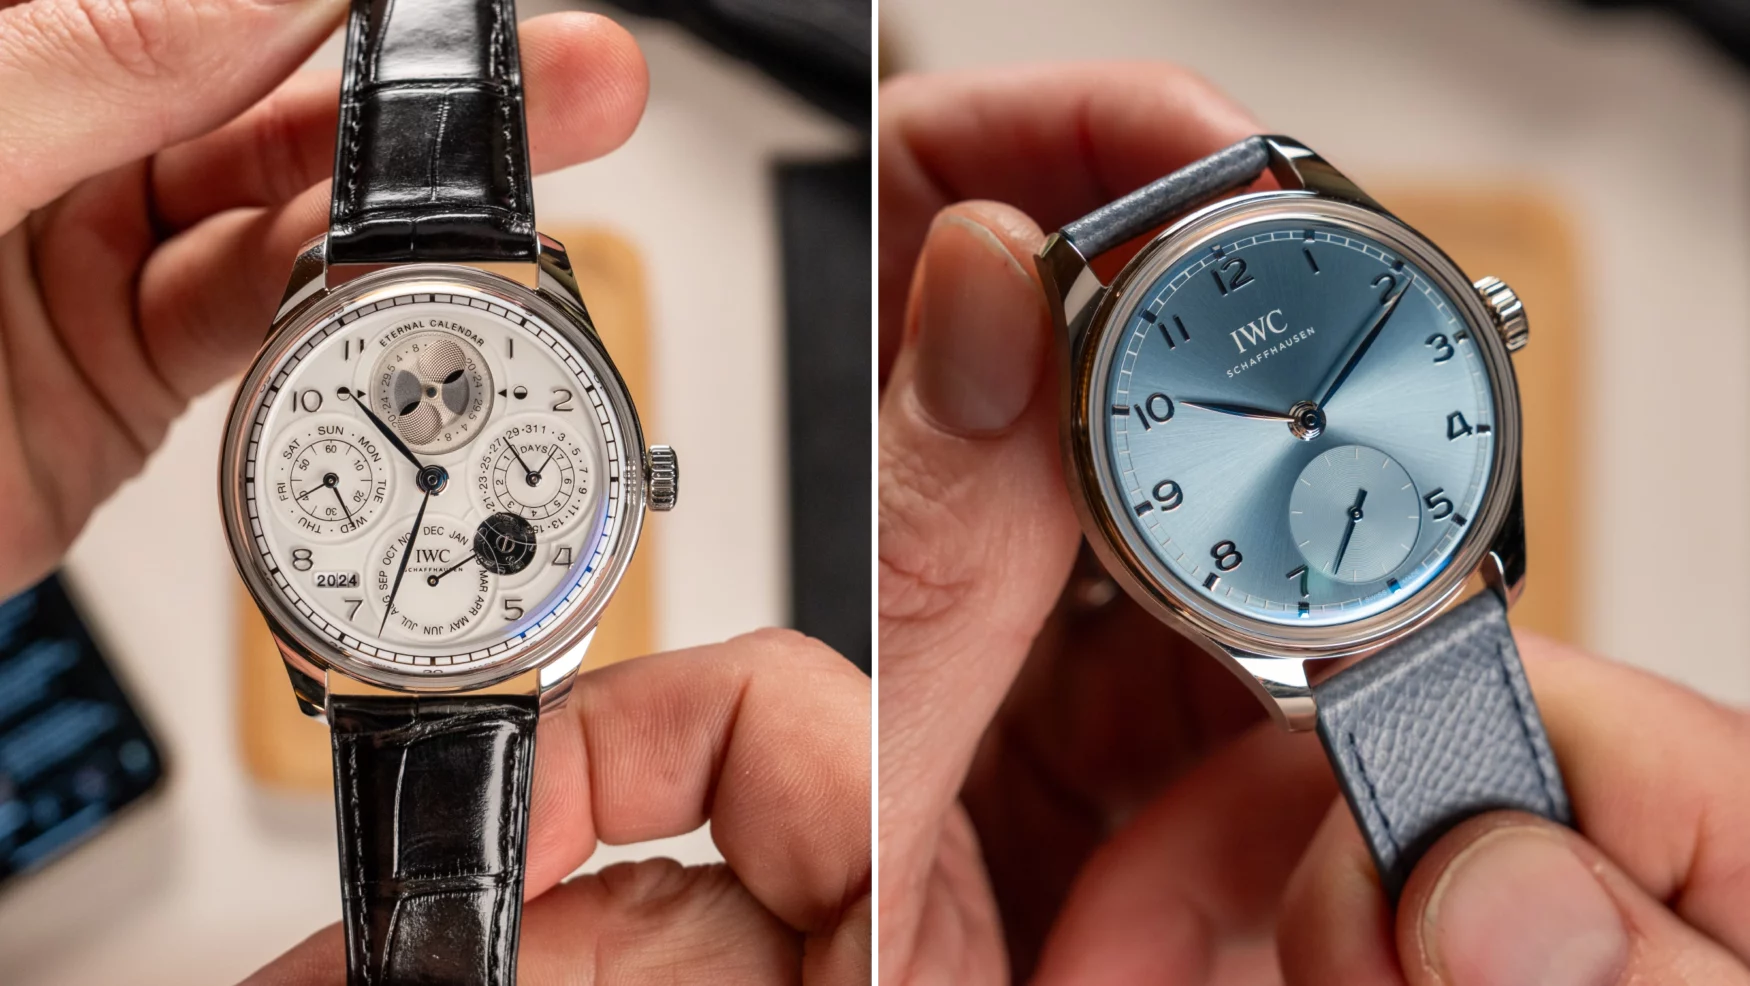 The inside scoop on IWC at Watches & Wonders 2024 from CEO Chris Grainger-Herr